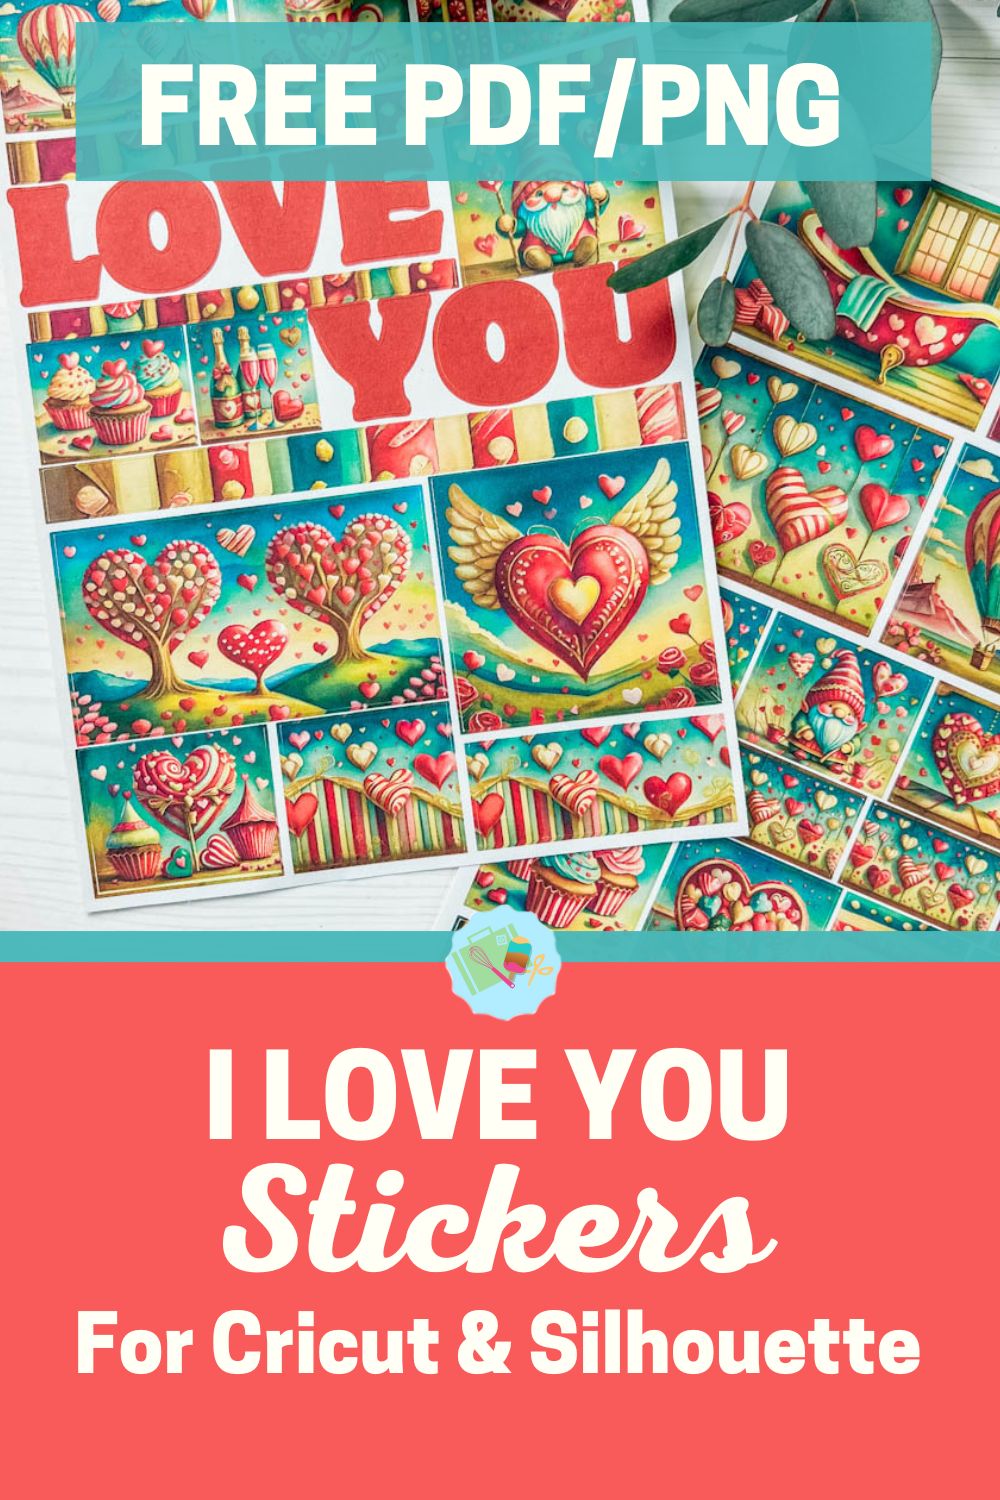 Free PDF PNG I Love You printable Stickers for Cricut and Silhouette